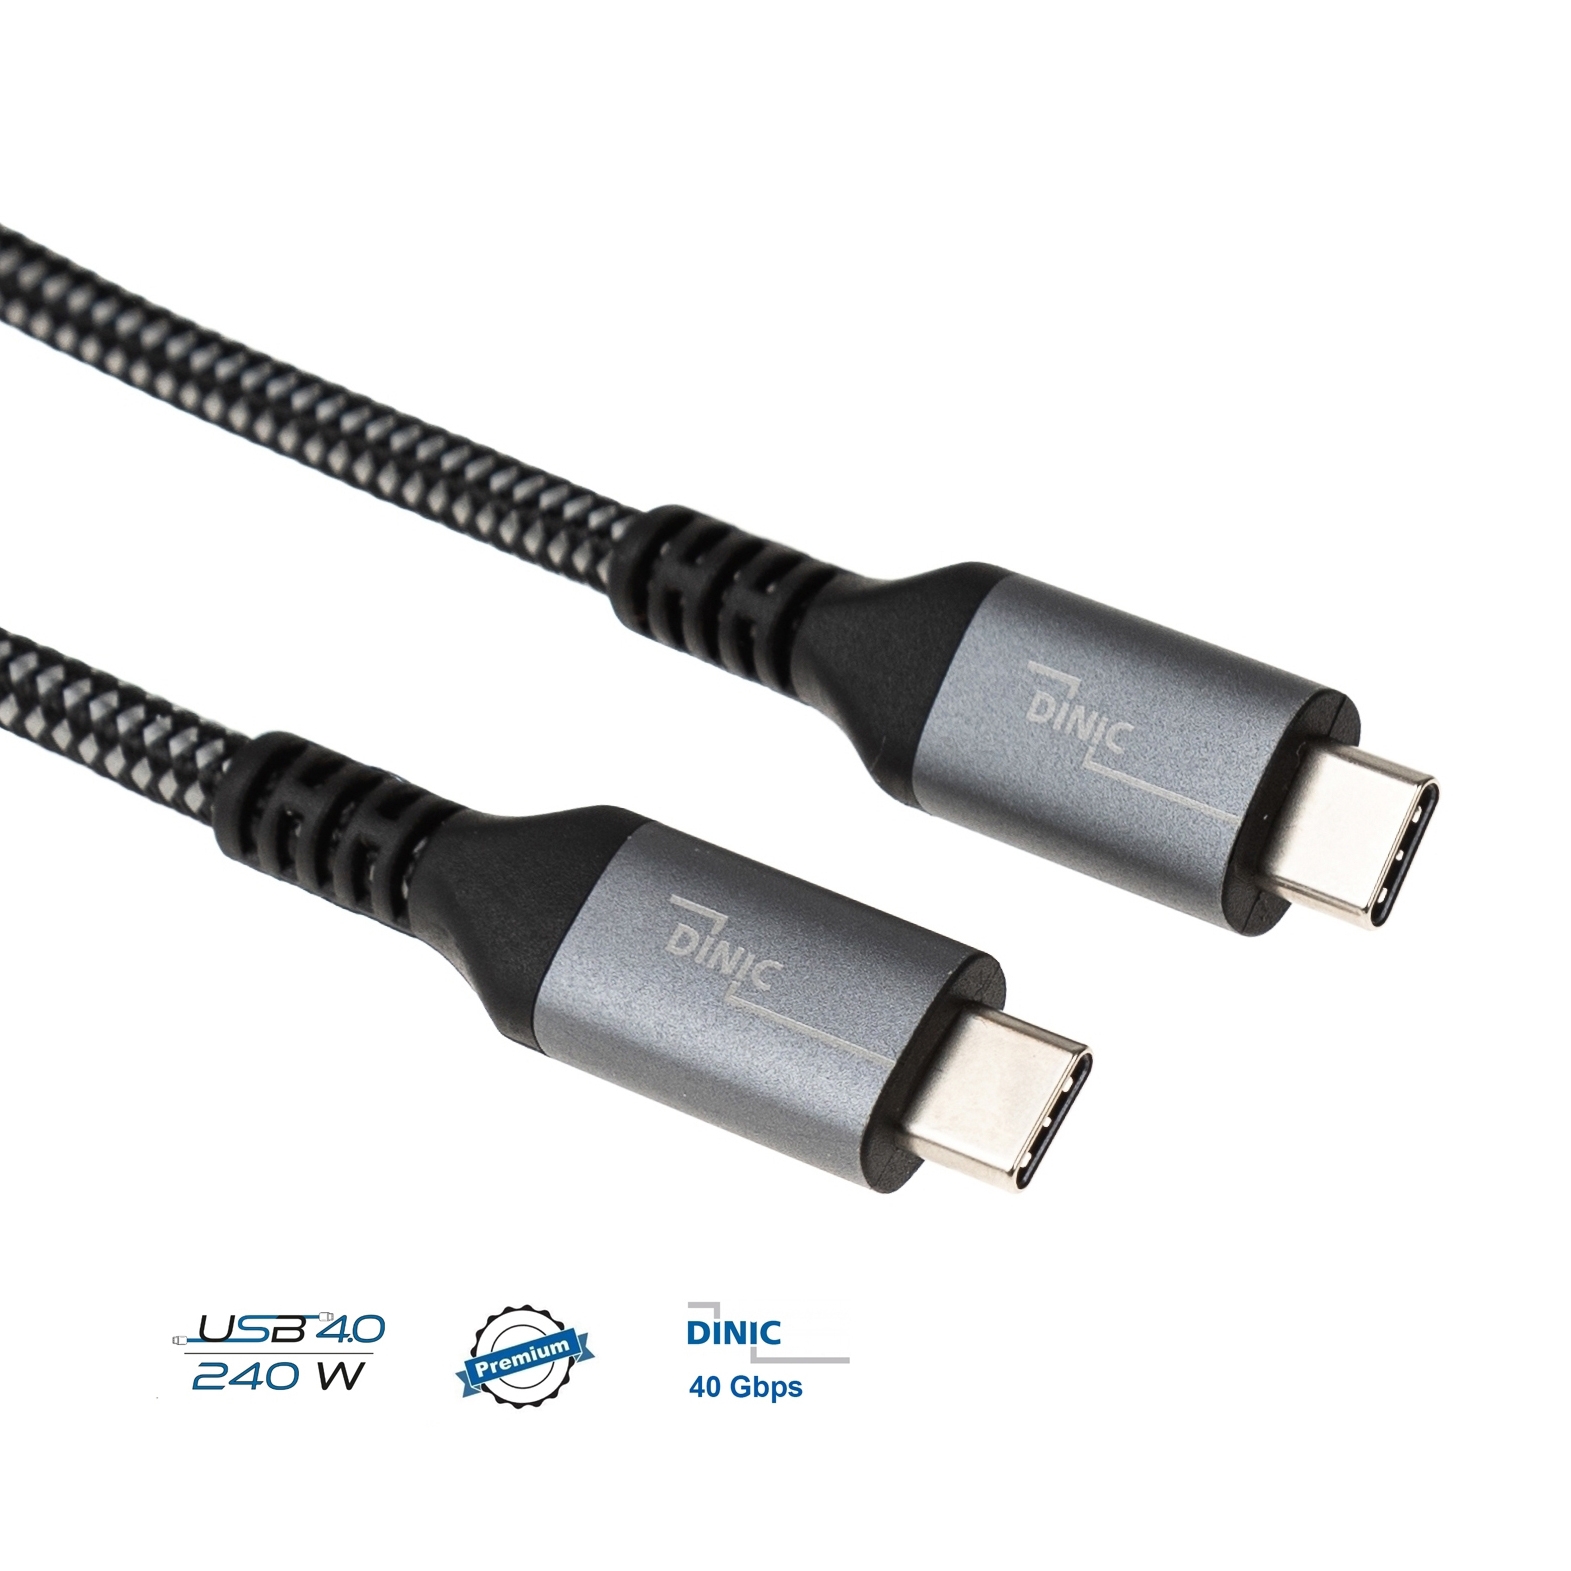 USB 4.0 cable, 2x Type-C™ male, 40 Gbps, 240 watts, 8K, 50cm